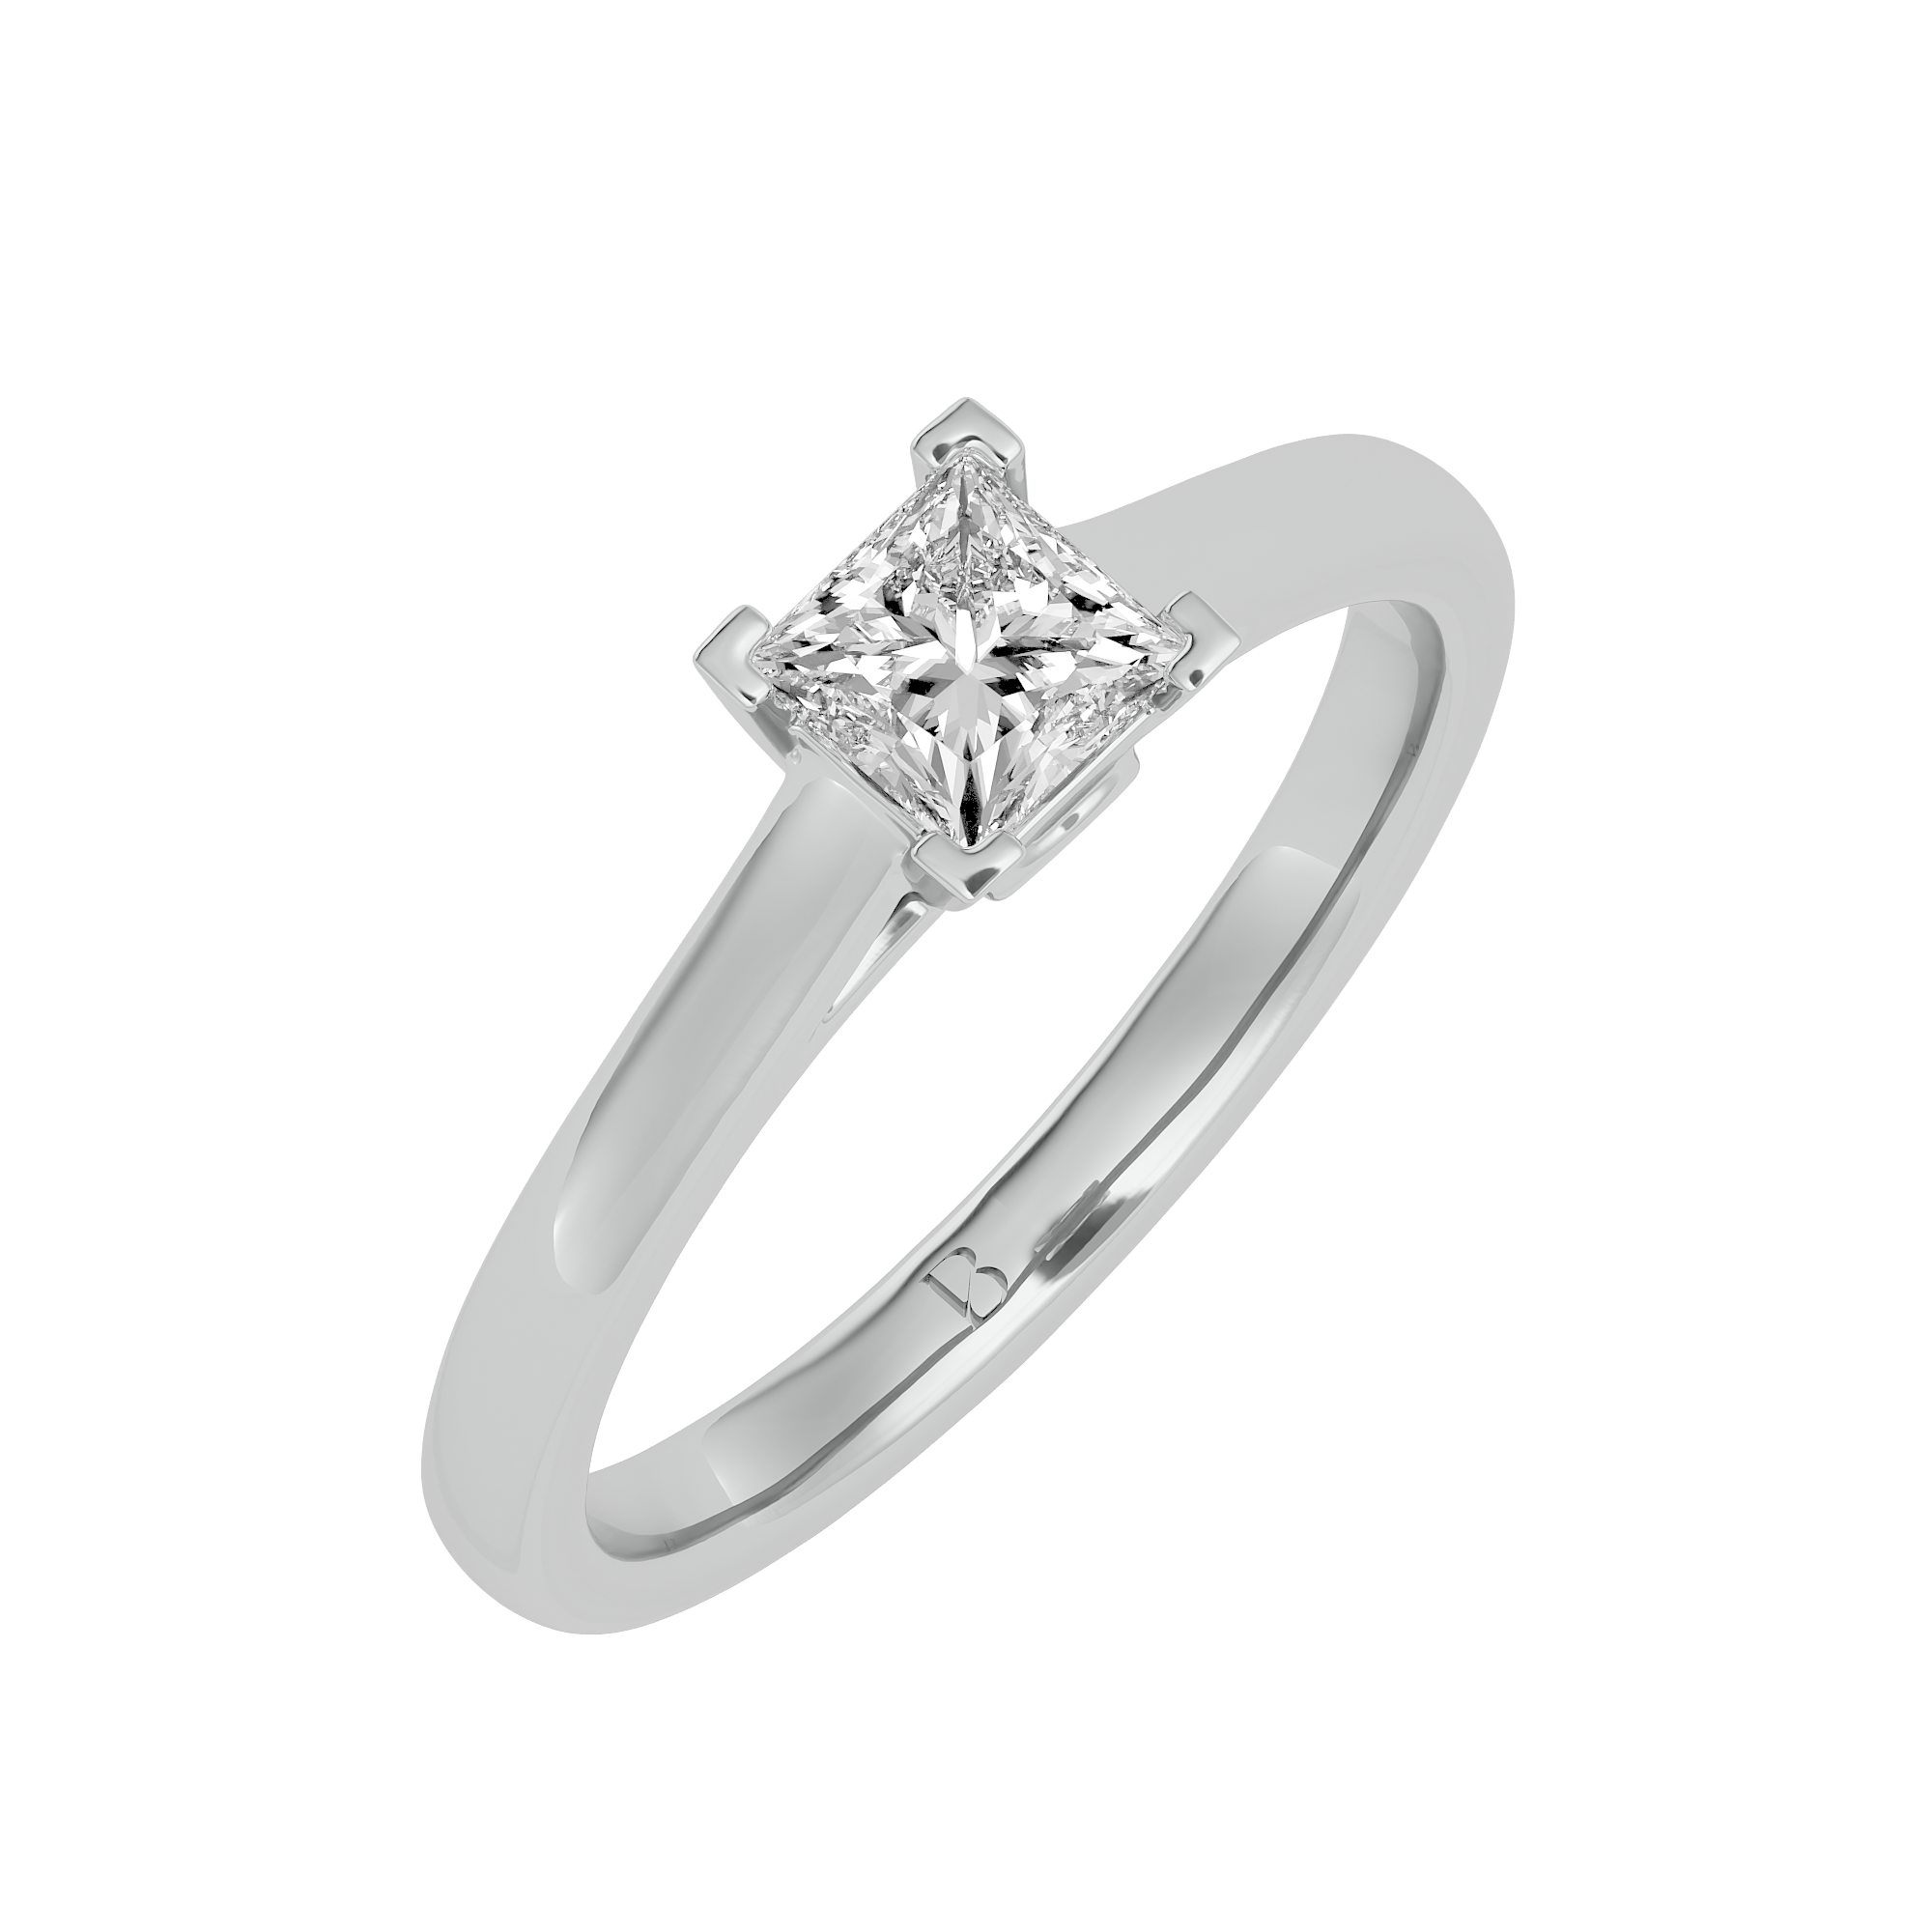 0.63 Ct Solitaire Lab Grown Diamond Ring - White Gold 